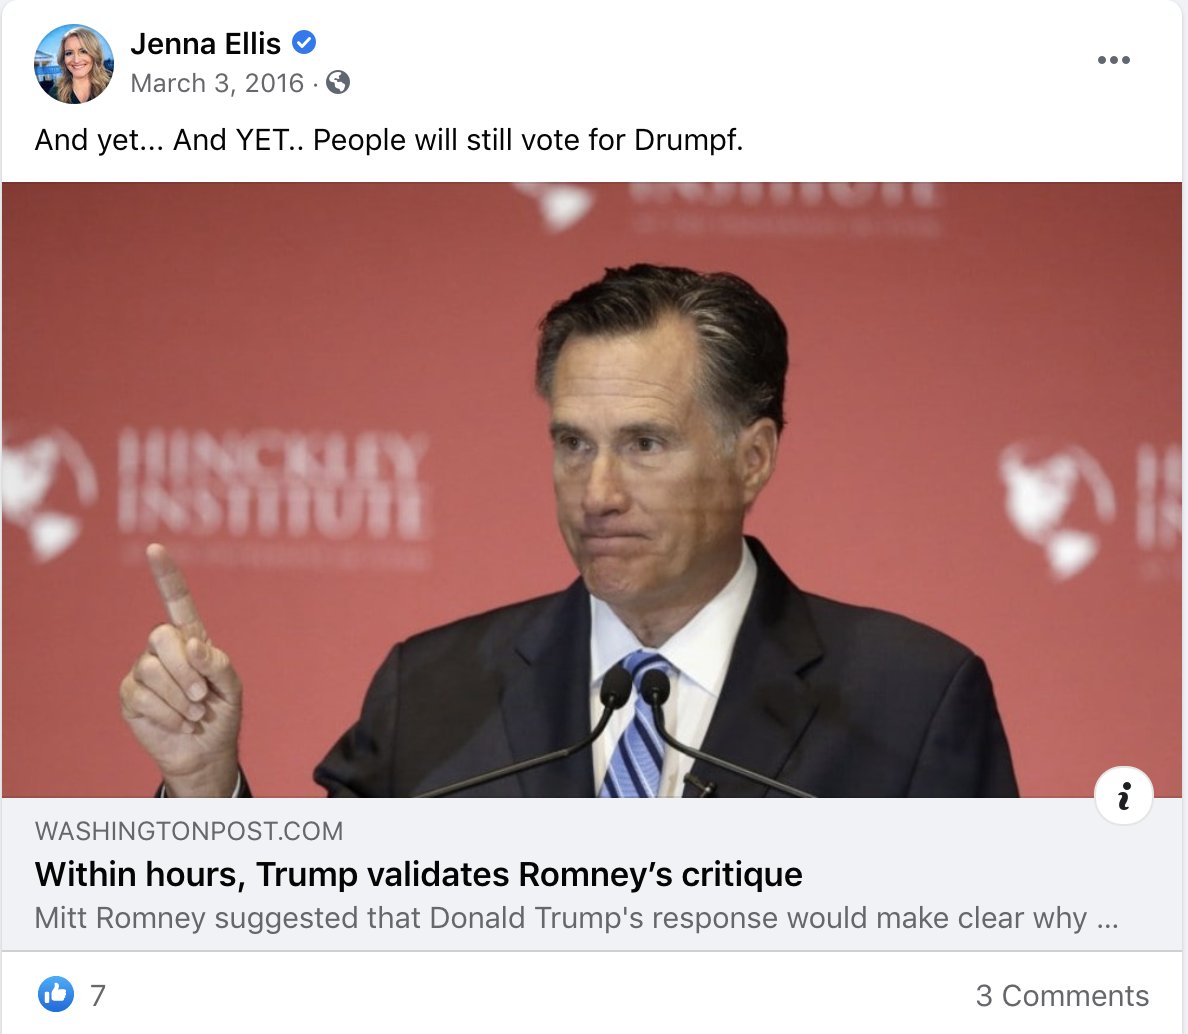 Ellis said Trump's values were "not American," linking to a post that called Trump an "American fascist." She praised Mitt Romney for speaking out against Trump, referring to Trump as "Drumpf."  https://www.cnn.com/2020/11/18/politics/kfile-jenna-ellis-2016-trump-comments/index.html